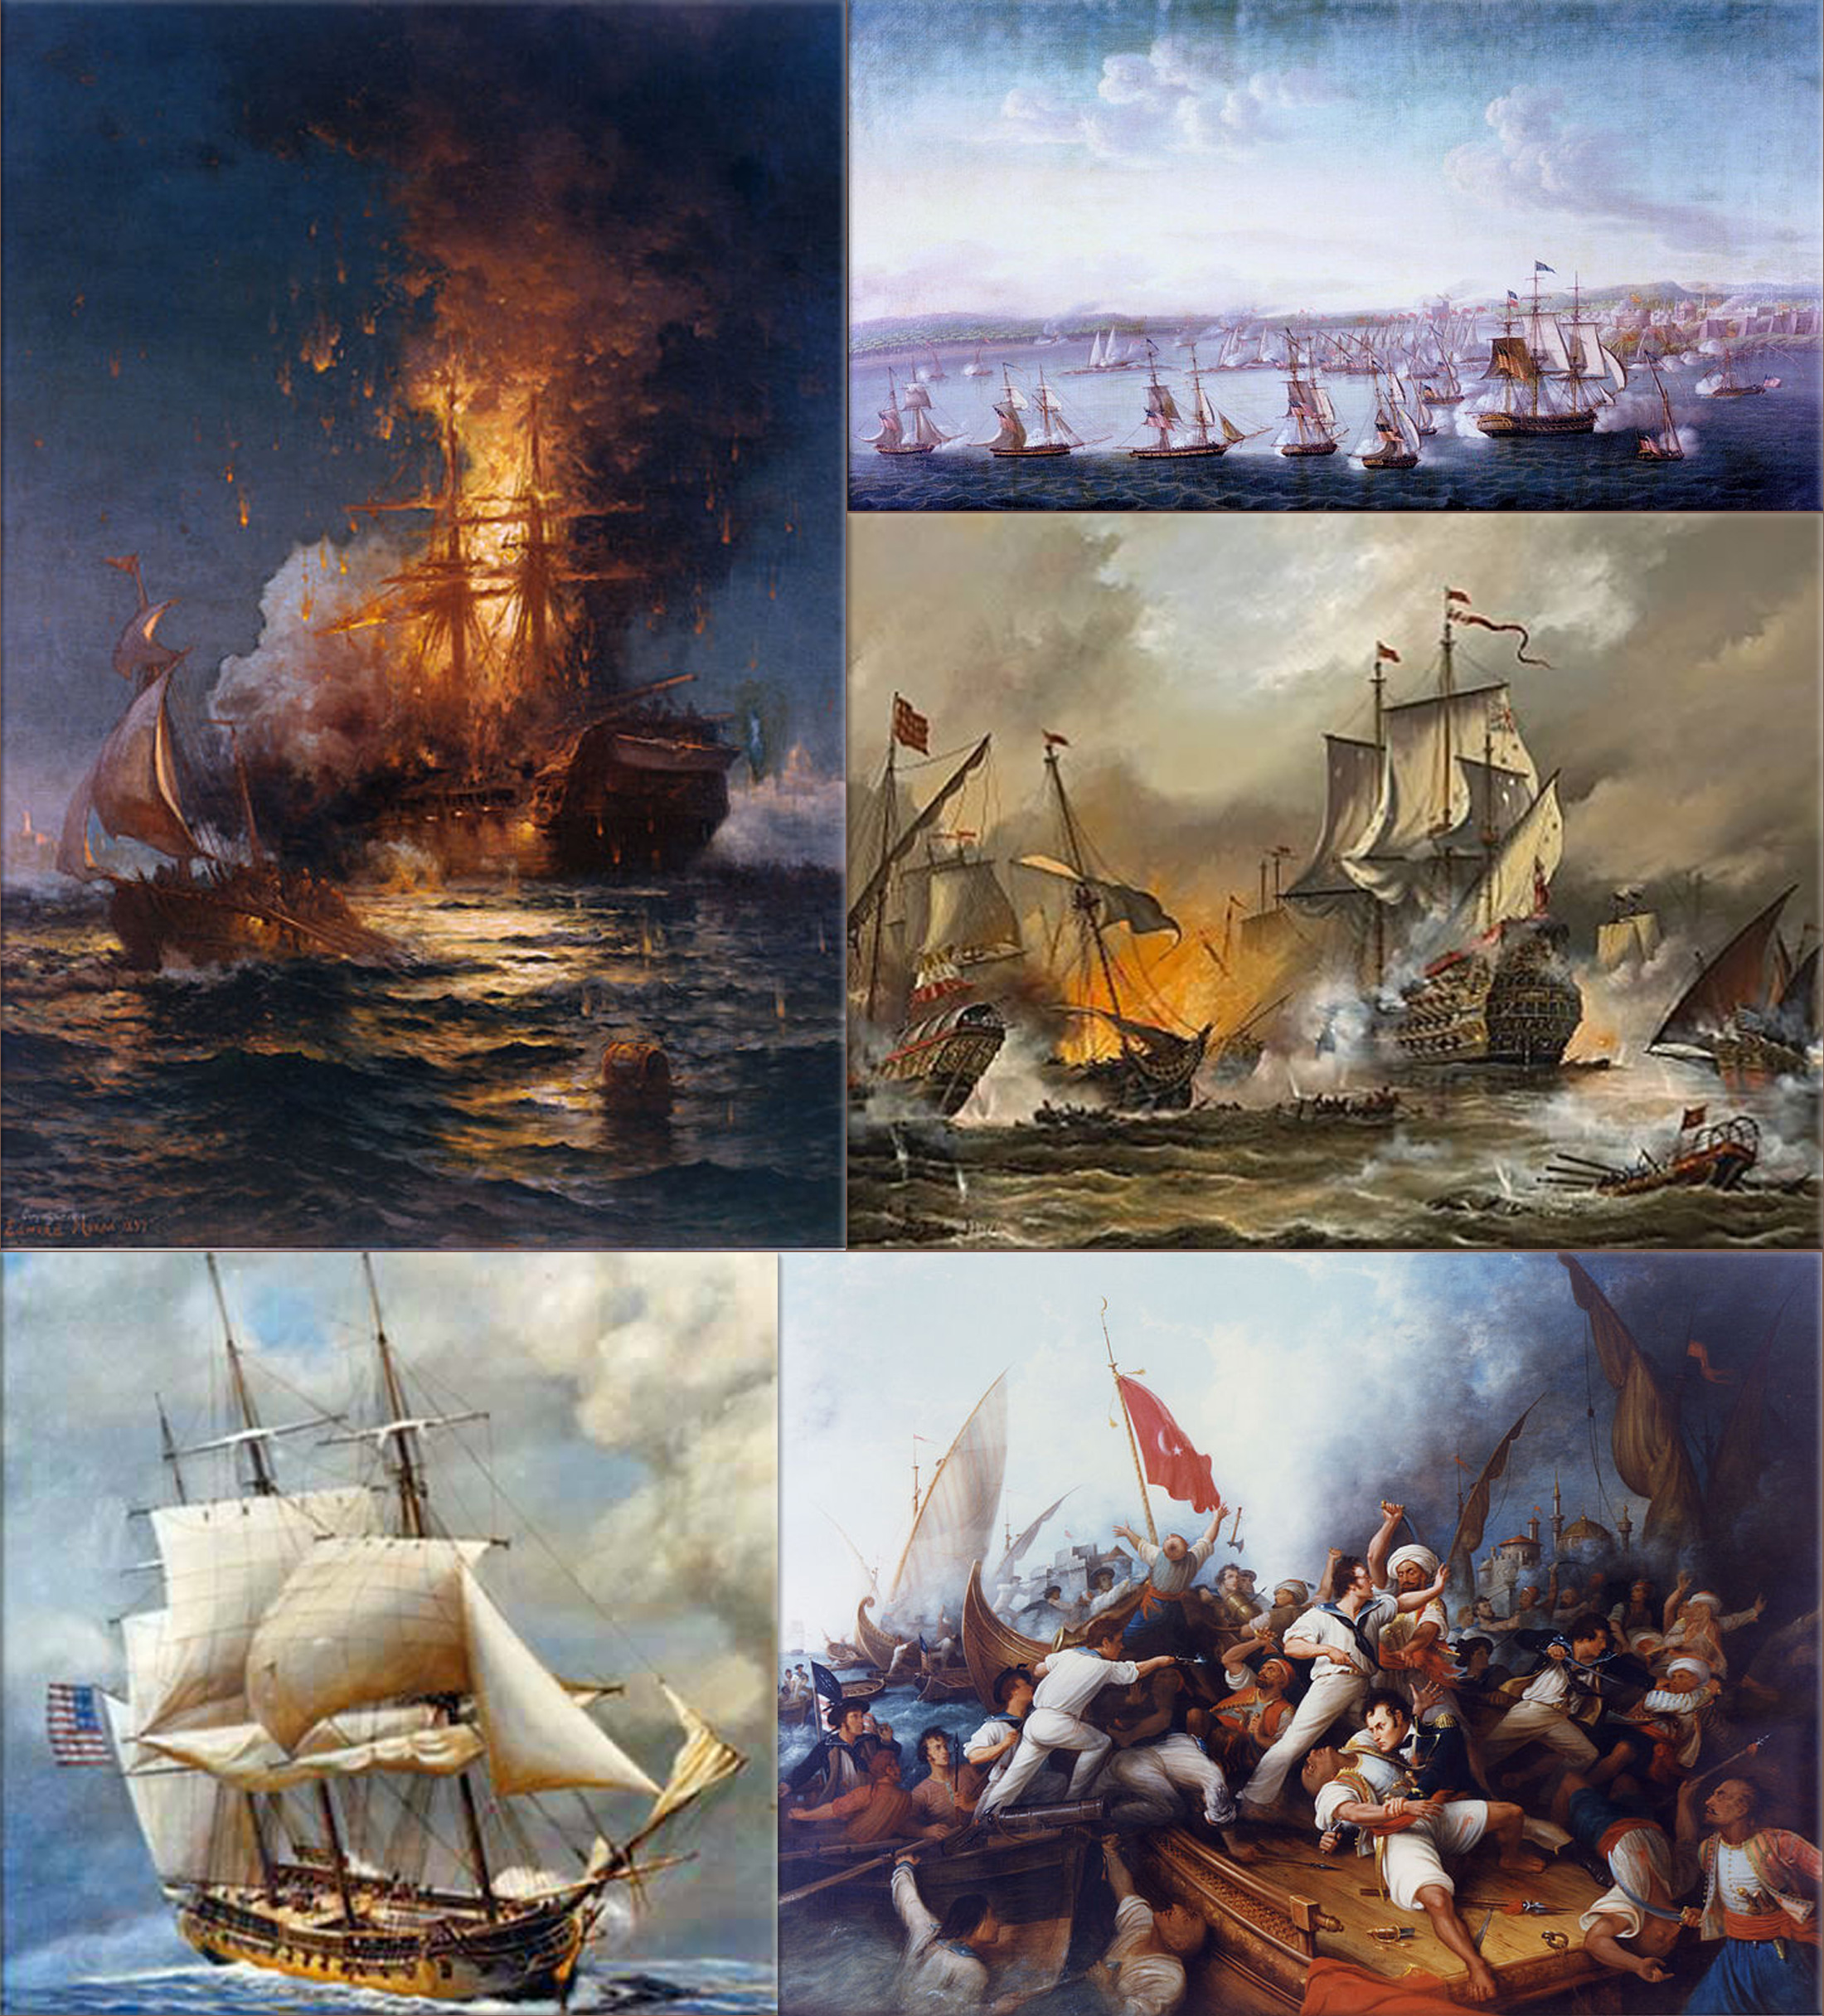 The First Barbary War (1801–1805): also known as the Tripolitan War or the Barbary Coast War, was the first of two wars fought between the United States and the Northwest African Berber Muslim states known collectively as the Barbary States